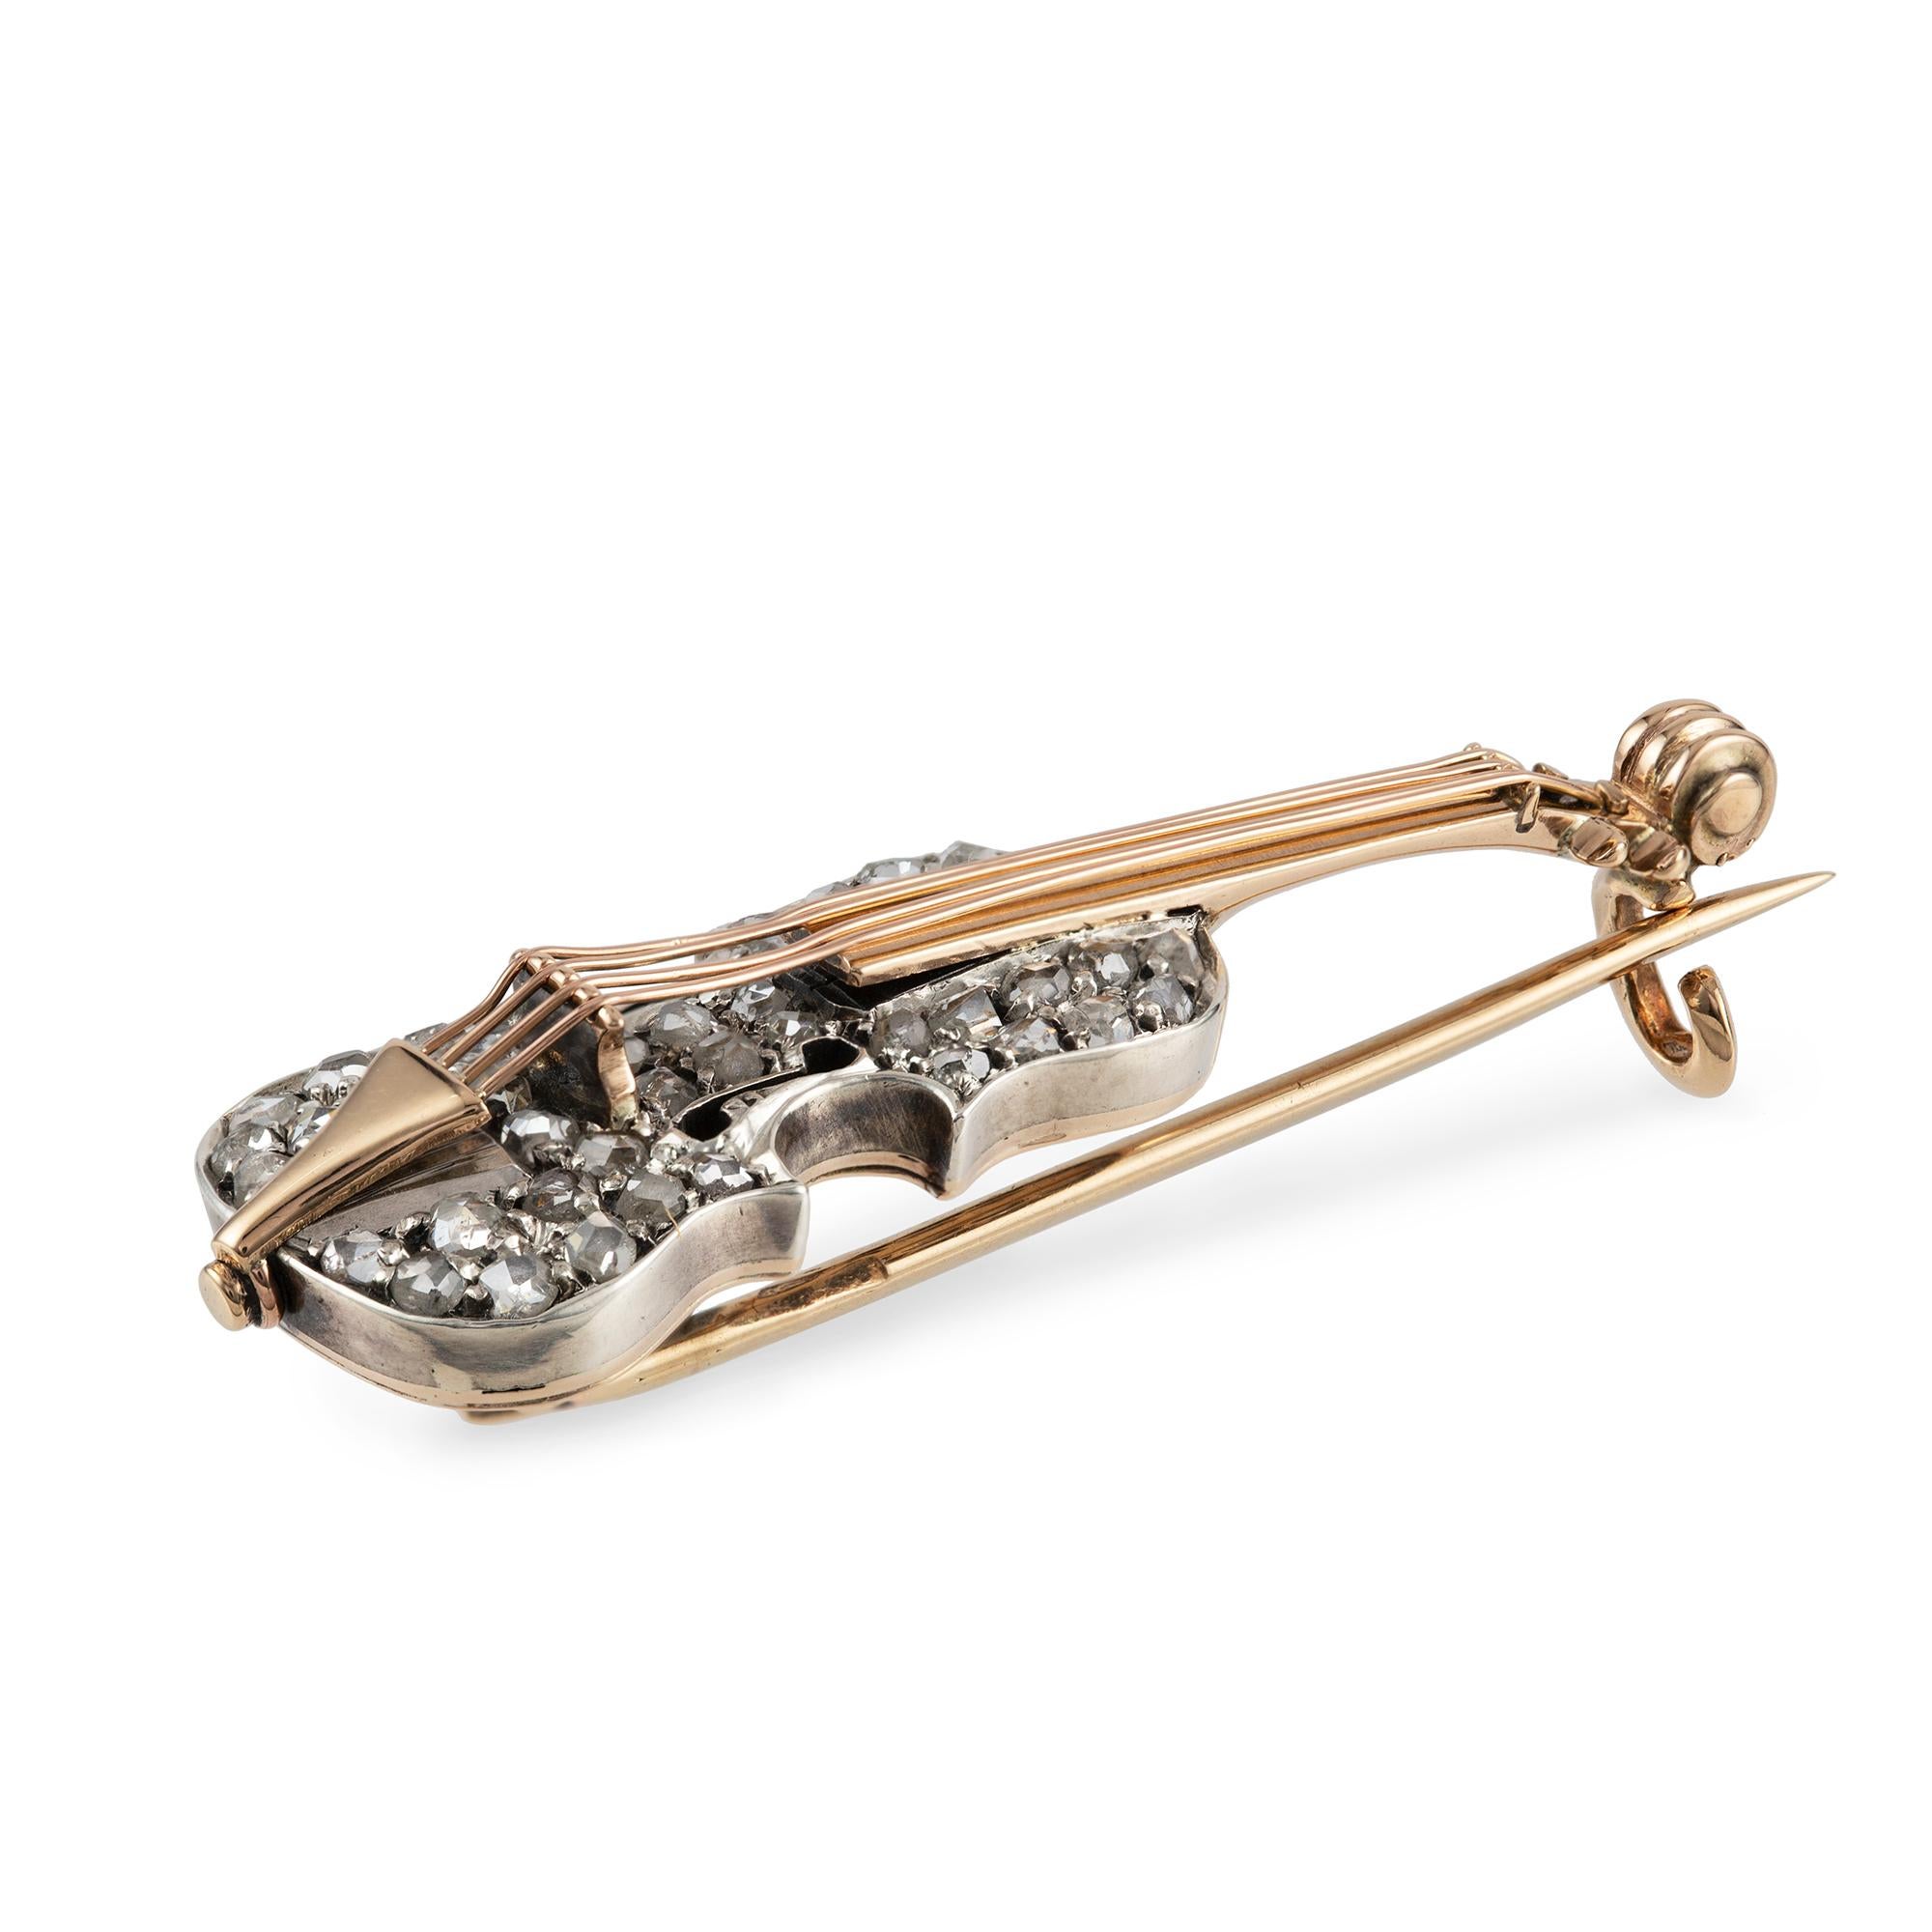 A late nineteenth century diamond brooch, finely modelled in the form of a violin, the body encrusted with rose-cut diamonds and the strings, neck and head in rose gold, French Import mark to the brooch pin, circa 1890, measuring approximately